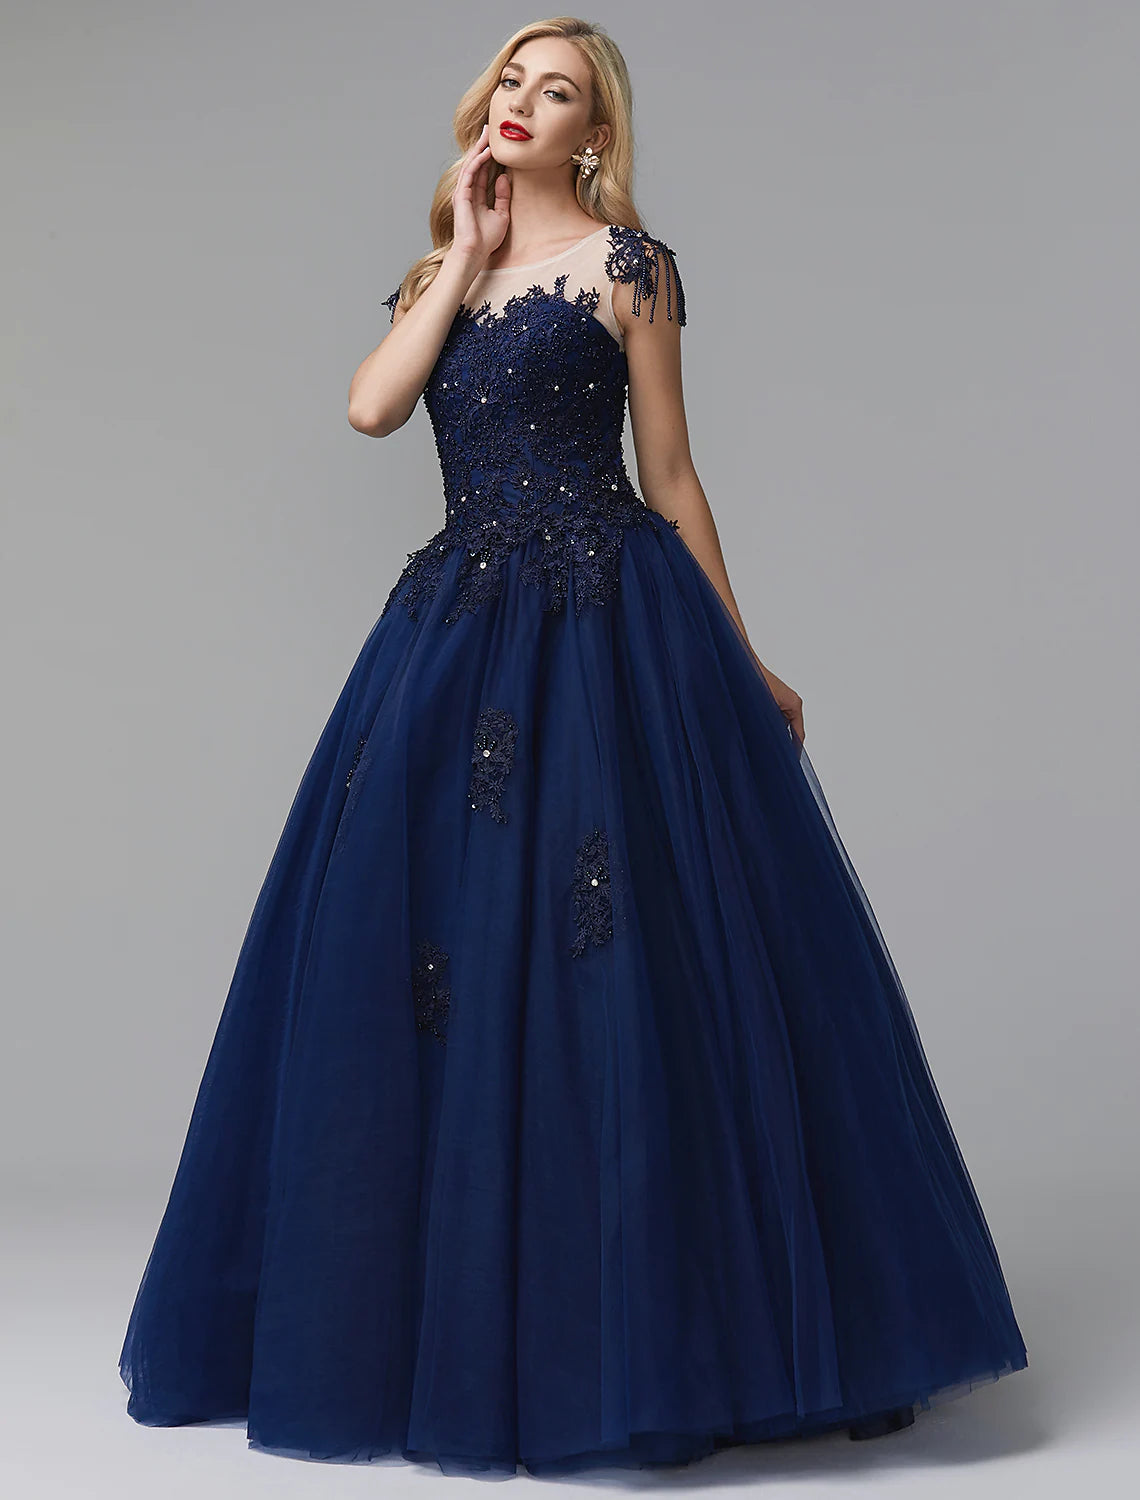 Ball Gown Prom Dresses Sparkle Dress Quinceanera Chapel Train Long Sleeve Off Shoulder Satin with Beading Appliques